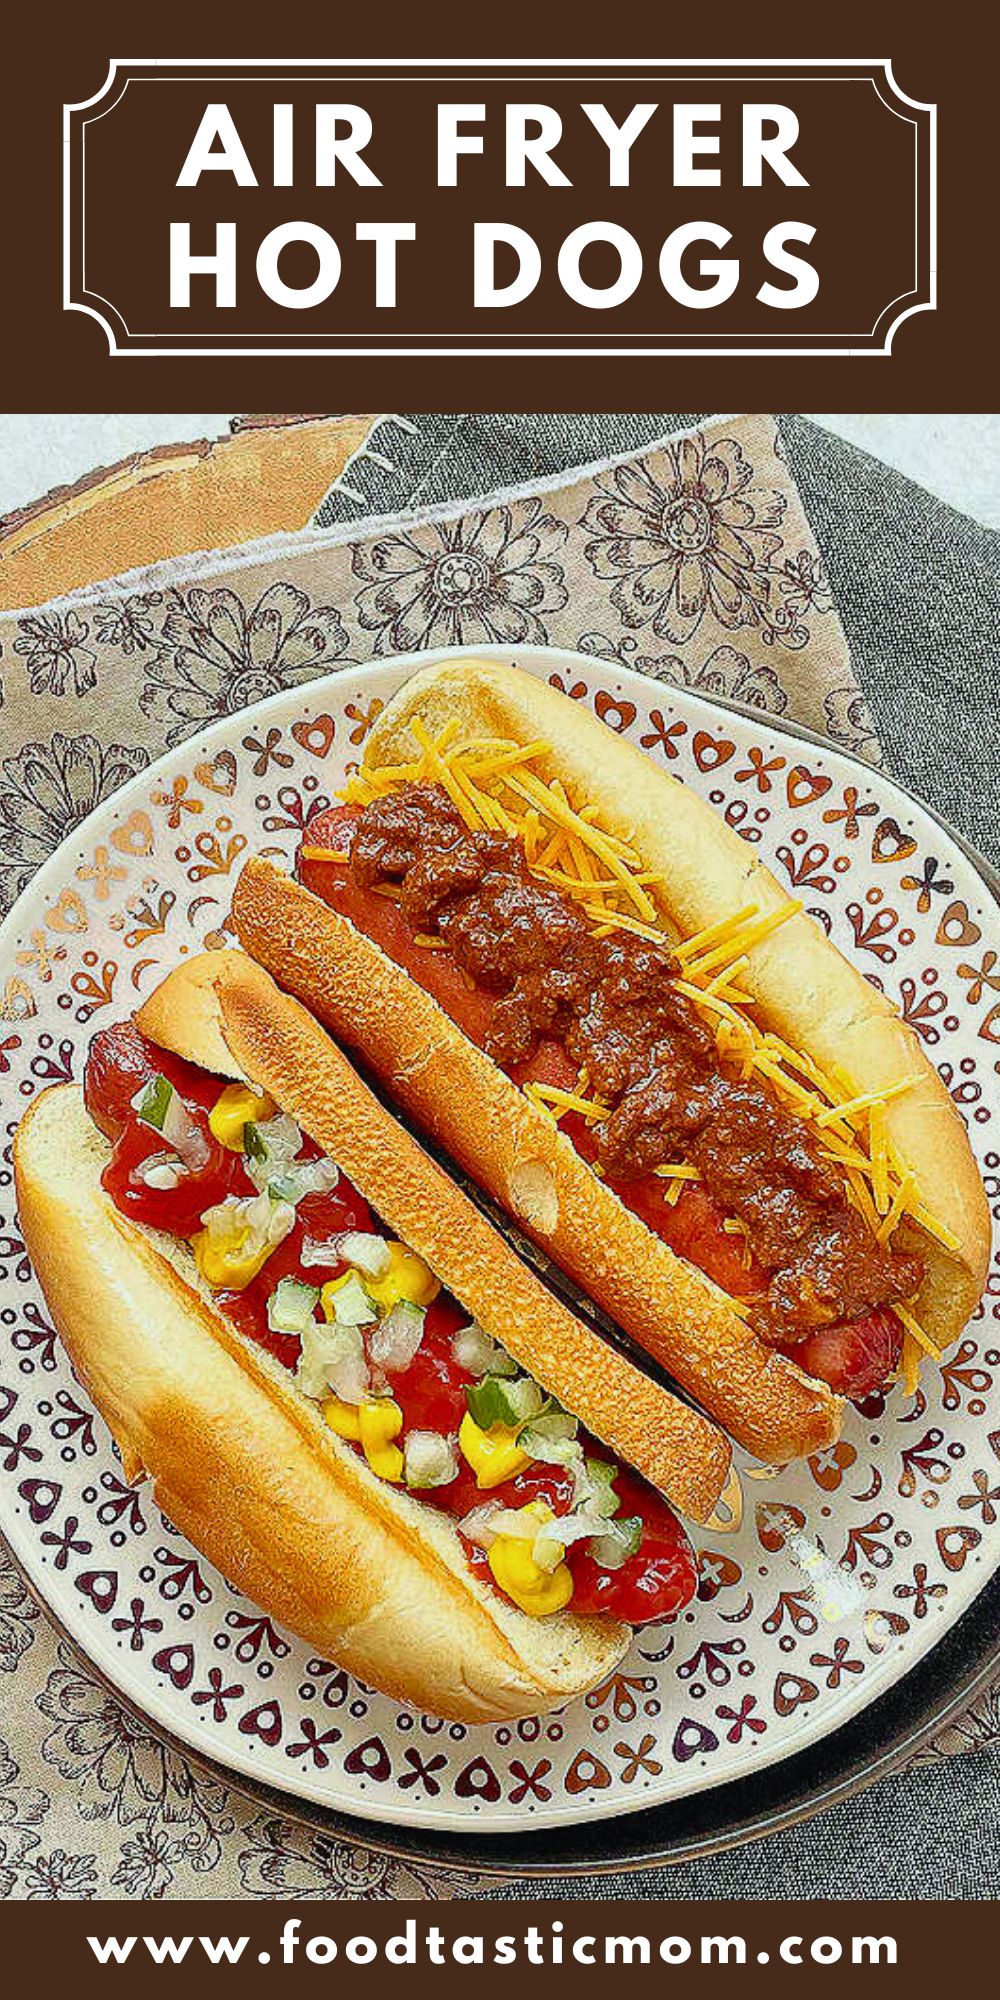 The air fryer works its magic again. These air fryer hot dogs are perfection - sizzling and juicy, ready for your favorite toppings. via @foodtasticmom